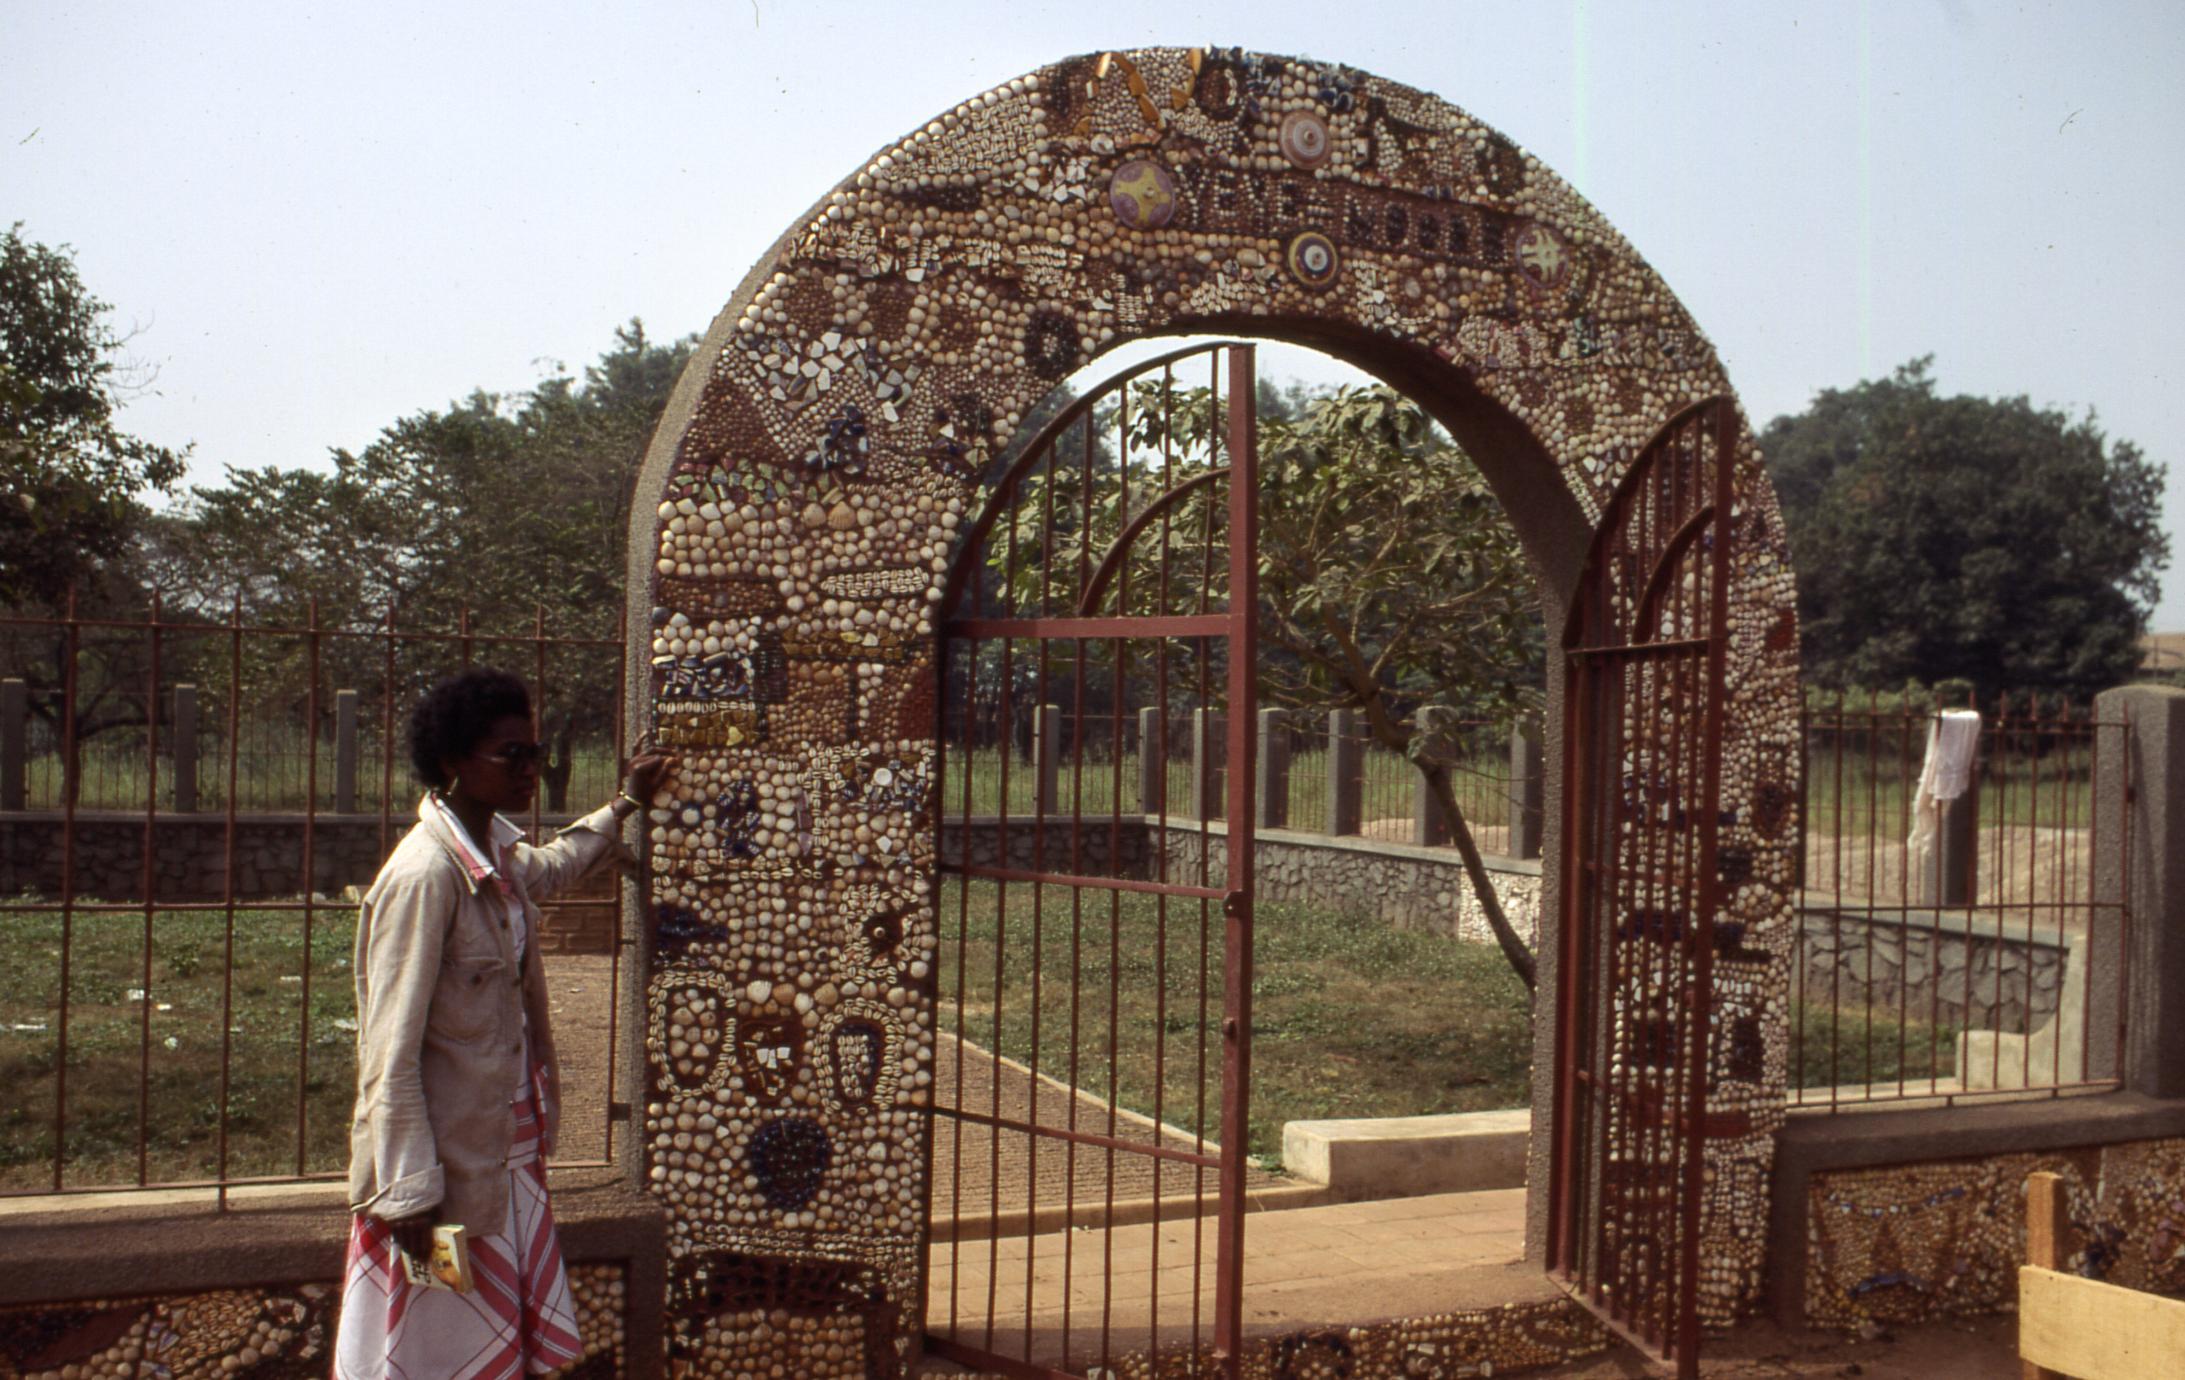 Palace gate in Ife